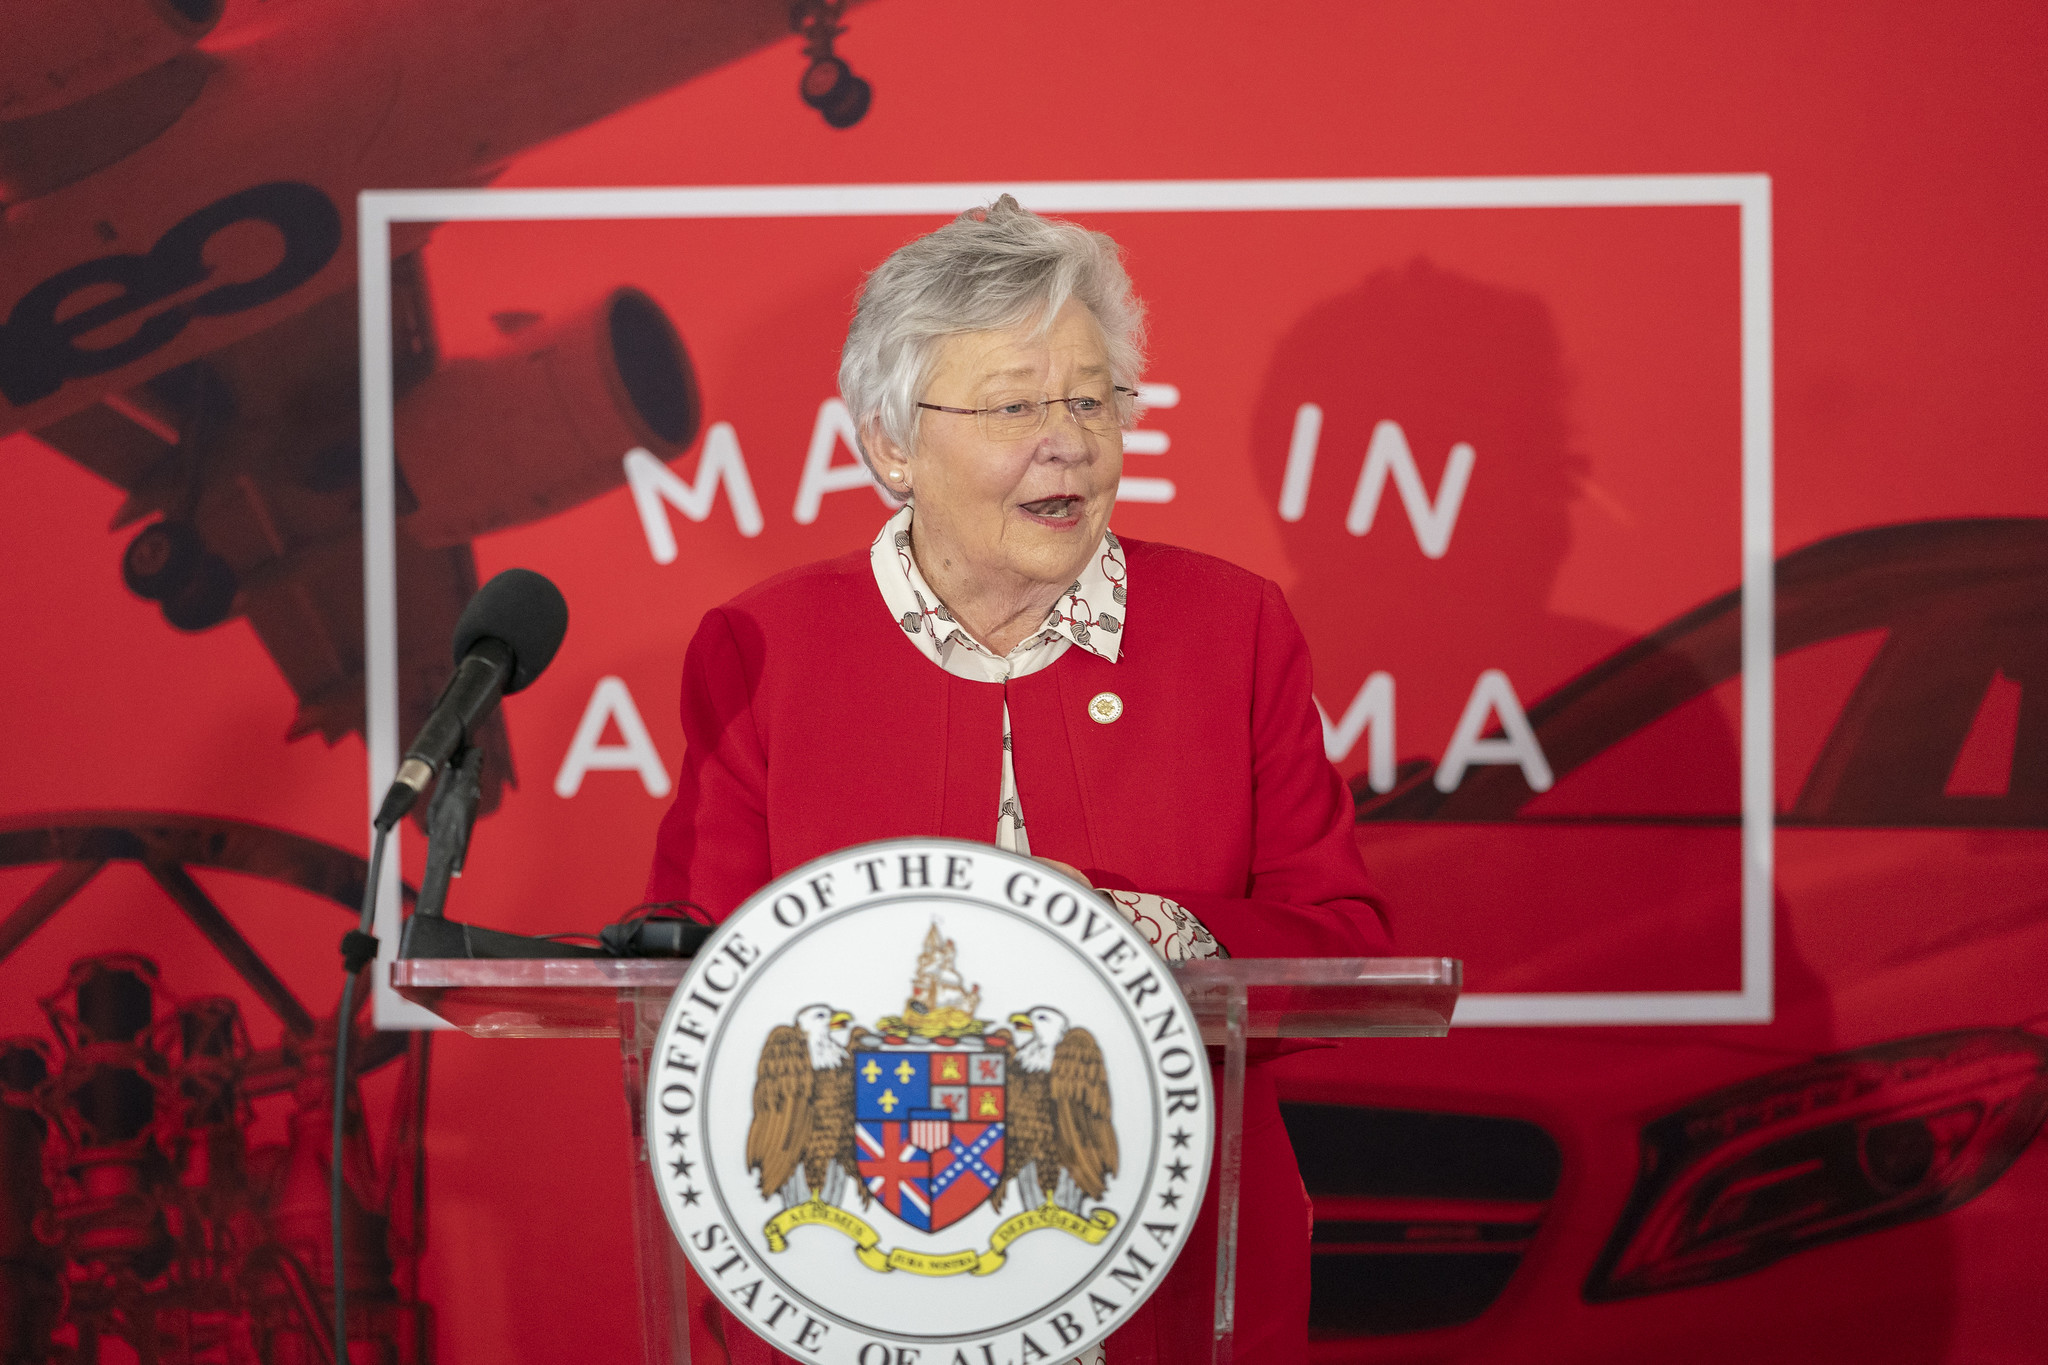 Governor Ivey Announces Alabama’s 2021 Exports Surpassed Pre-Pandemic Levels, Showed Robust Gains as State’s Economic Momentum Accelerates